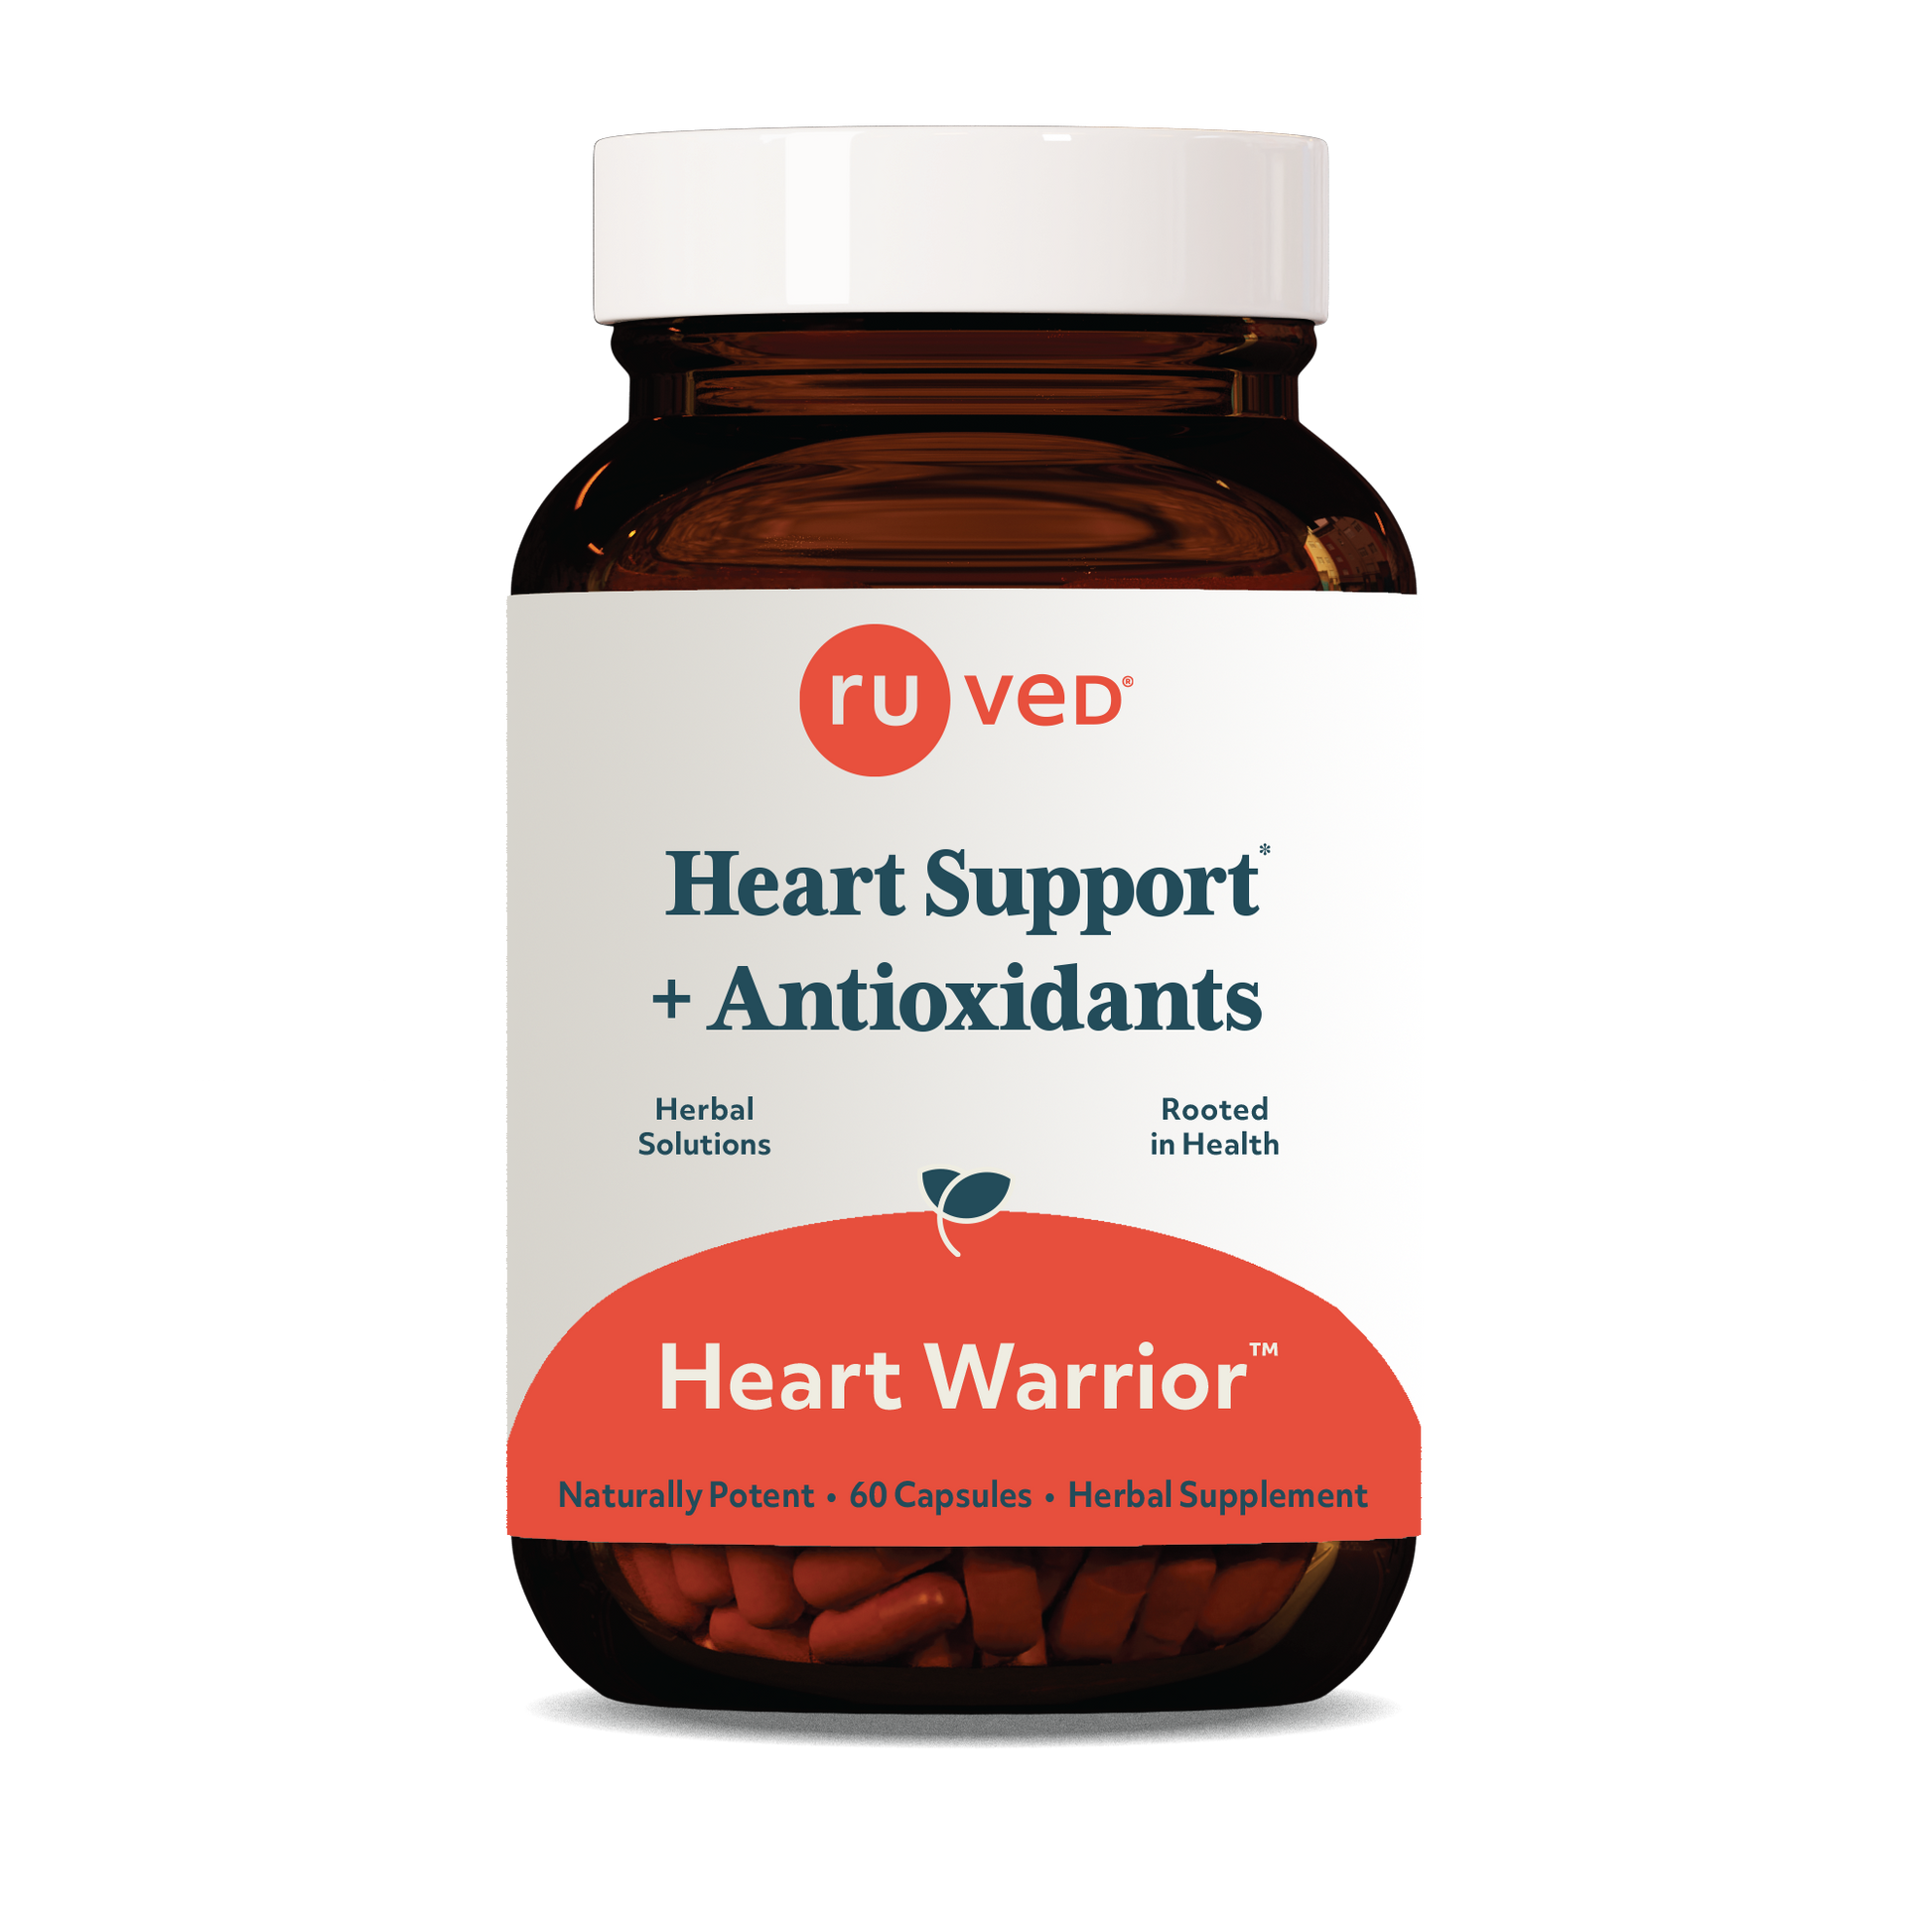 heart warrior Full Spectrum Heart Support, Promotes Healthy Circulation and Exercise Performance by ruved herbal supplements and ayush herbs